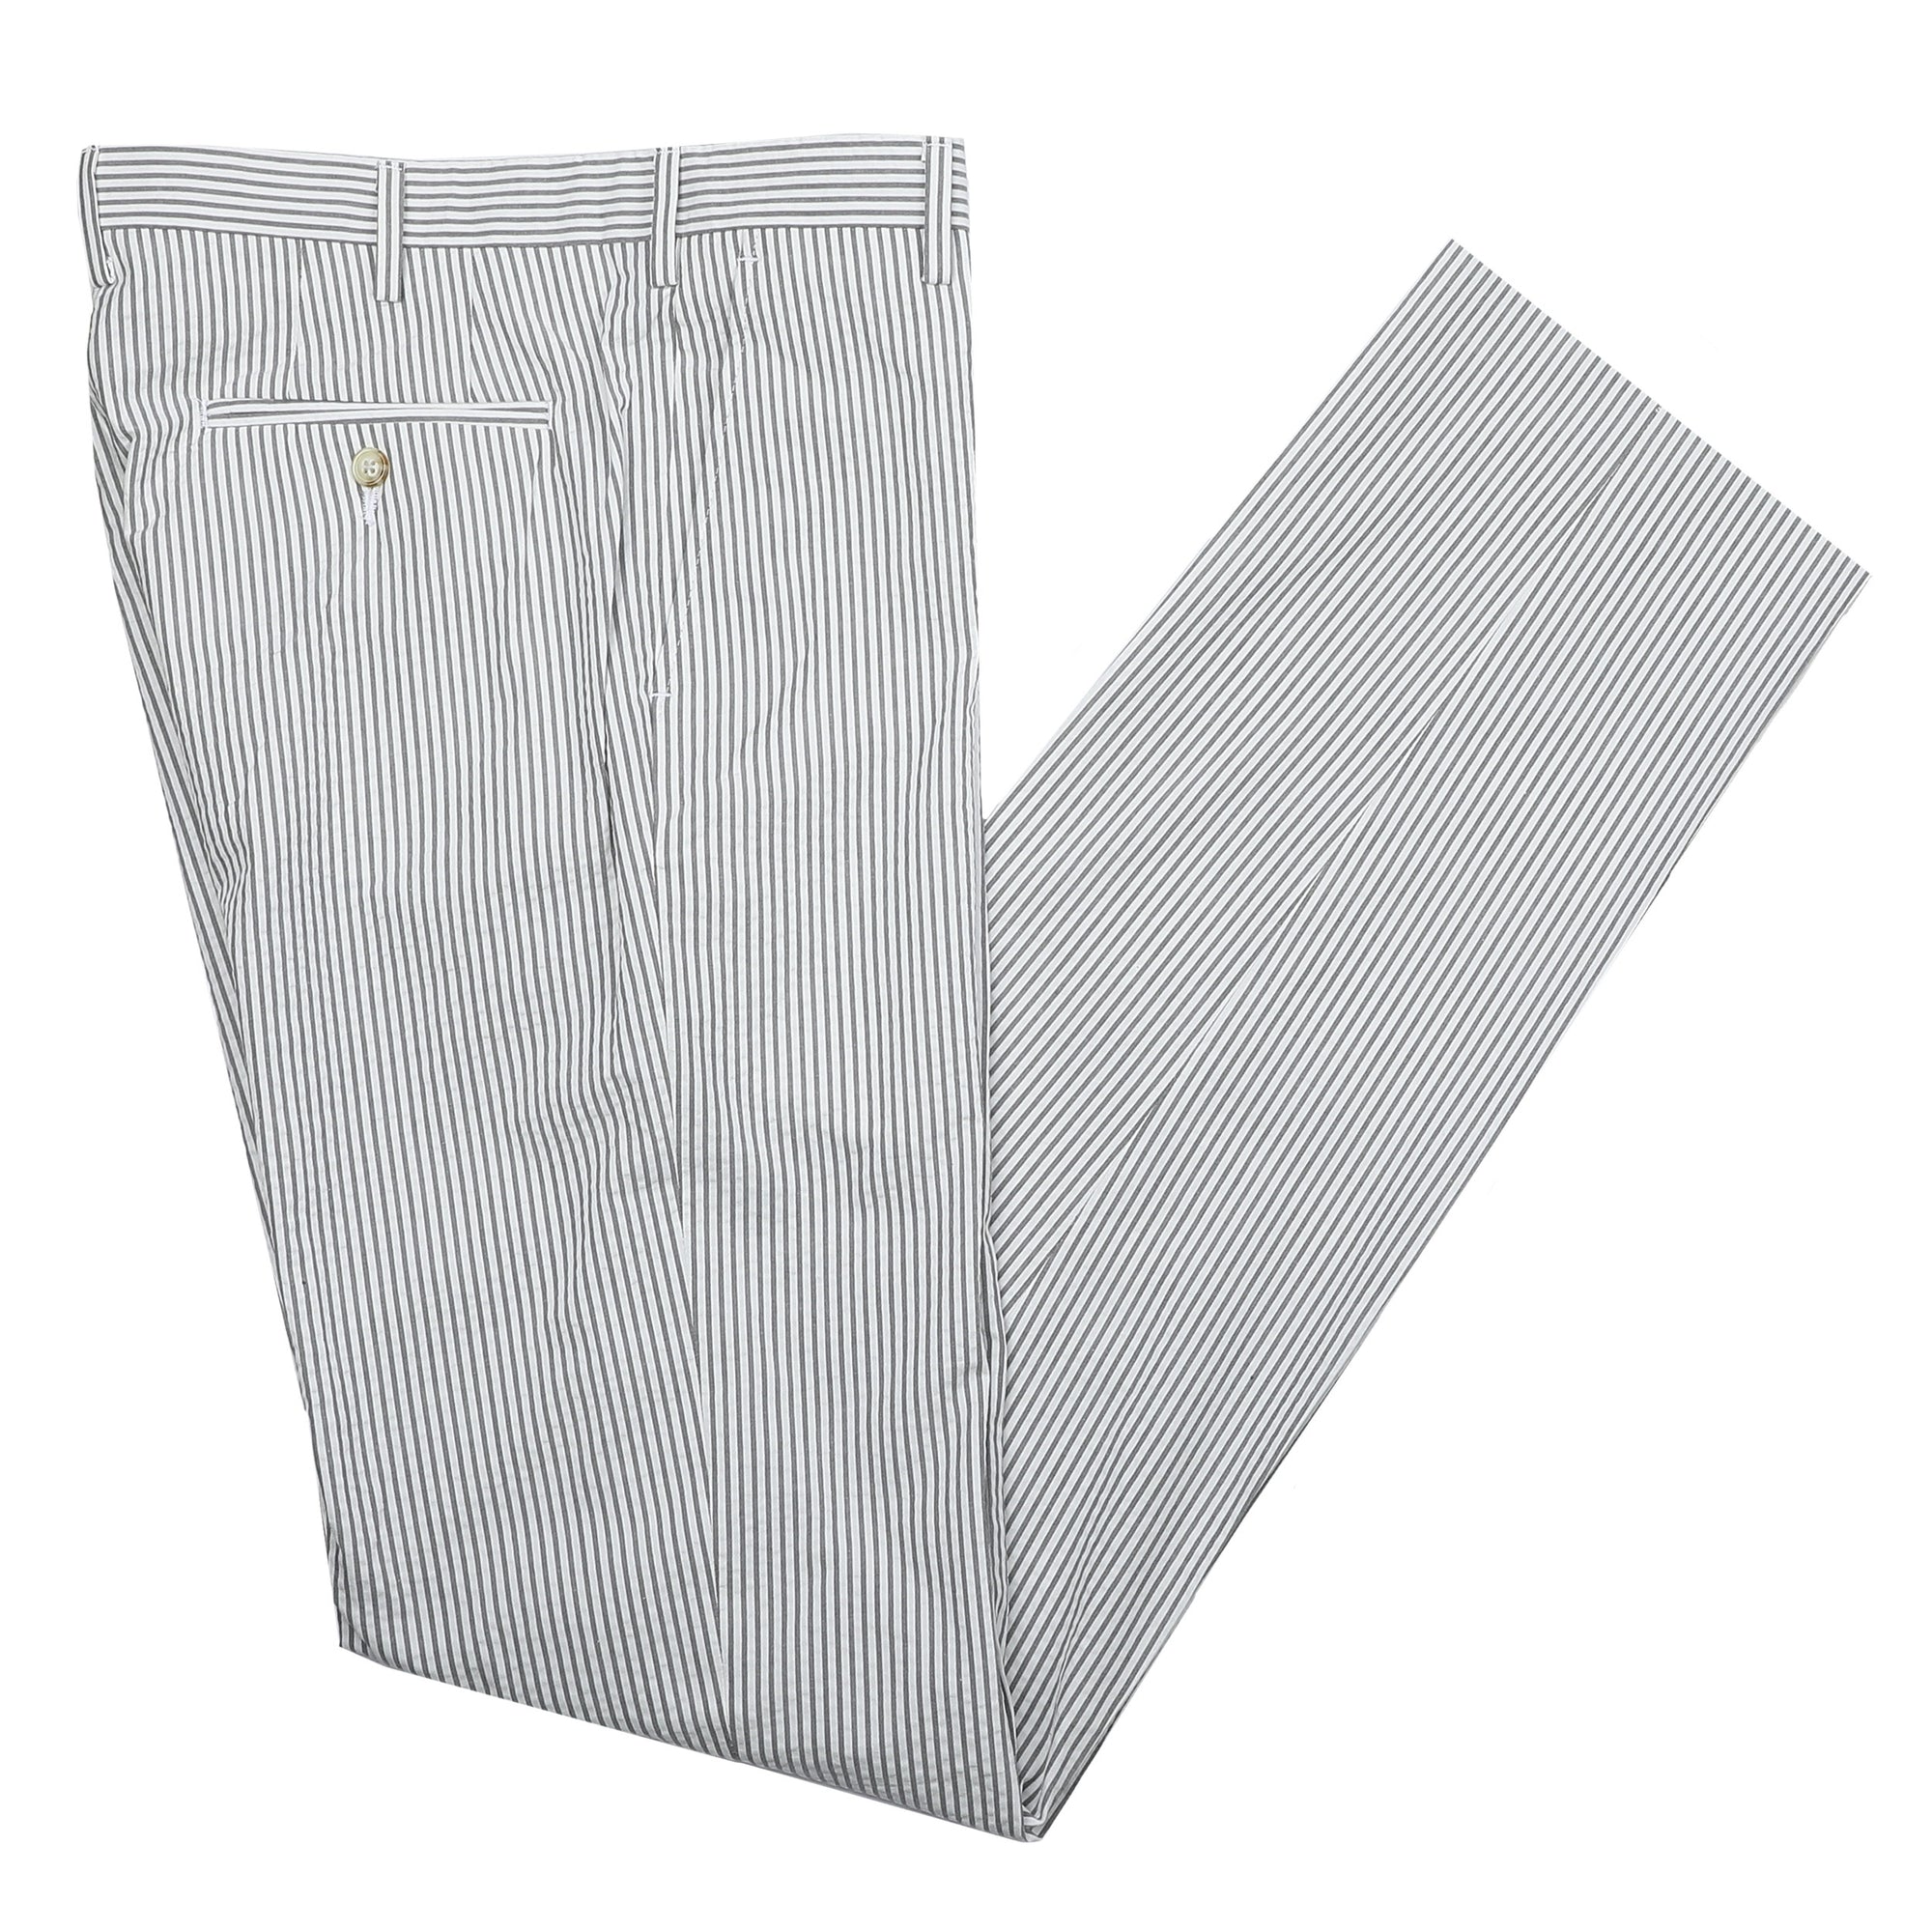 Experience the breezy, classic charm of our Algiers Gray / White Seersucker Pant. These stunning New Orleans-inspired trousers are perfect for your next summer outing. Cut from lightweight seersucker fabric, they combine timeless Tan and White stripes with a relaxed fit for unbeatable comfort and style. Try them this season for a look that radiates effortless elegance!  100% Cotton Seersucker • Algiers Fit • Flat Front • Tab Button Closure • Unfinished Bottom (37.5") • Dry Clean • Imported